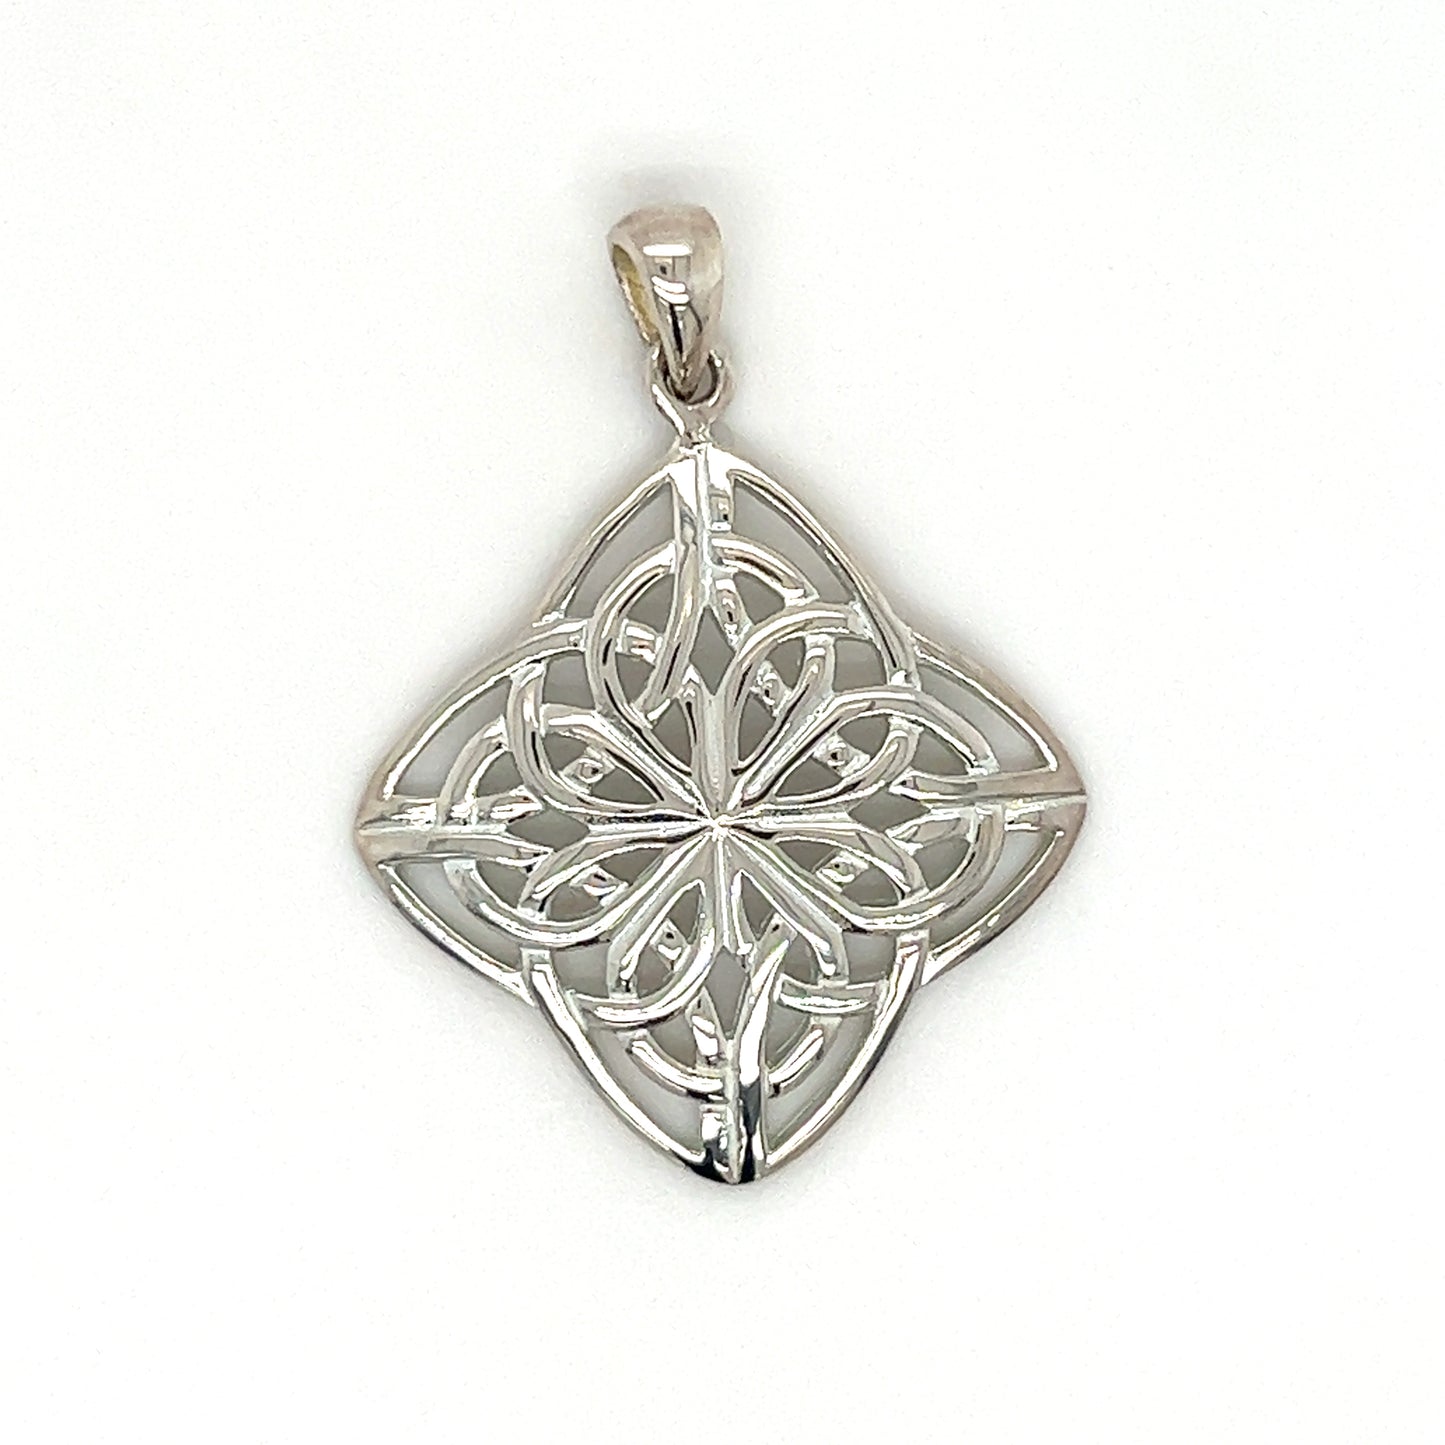 A Square Celtic Knot Pendant made of sterling silver, showcasing intricate symbolism by Super Silver.